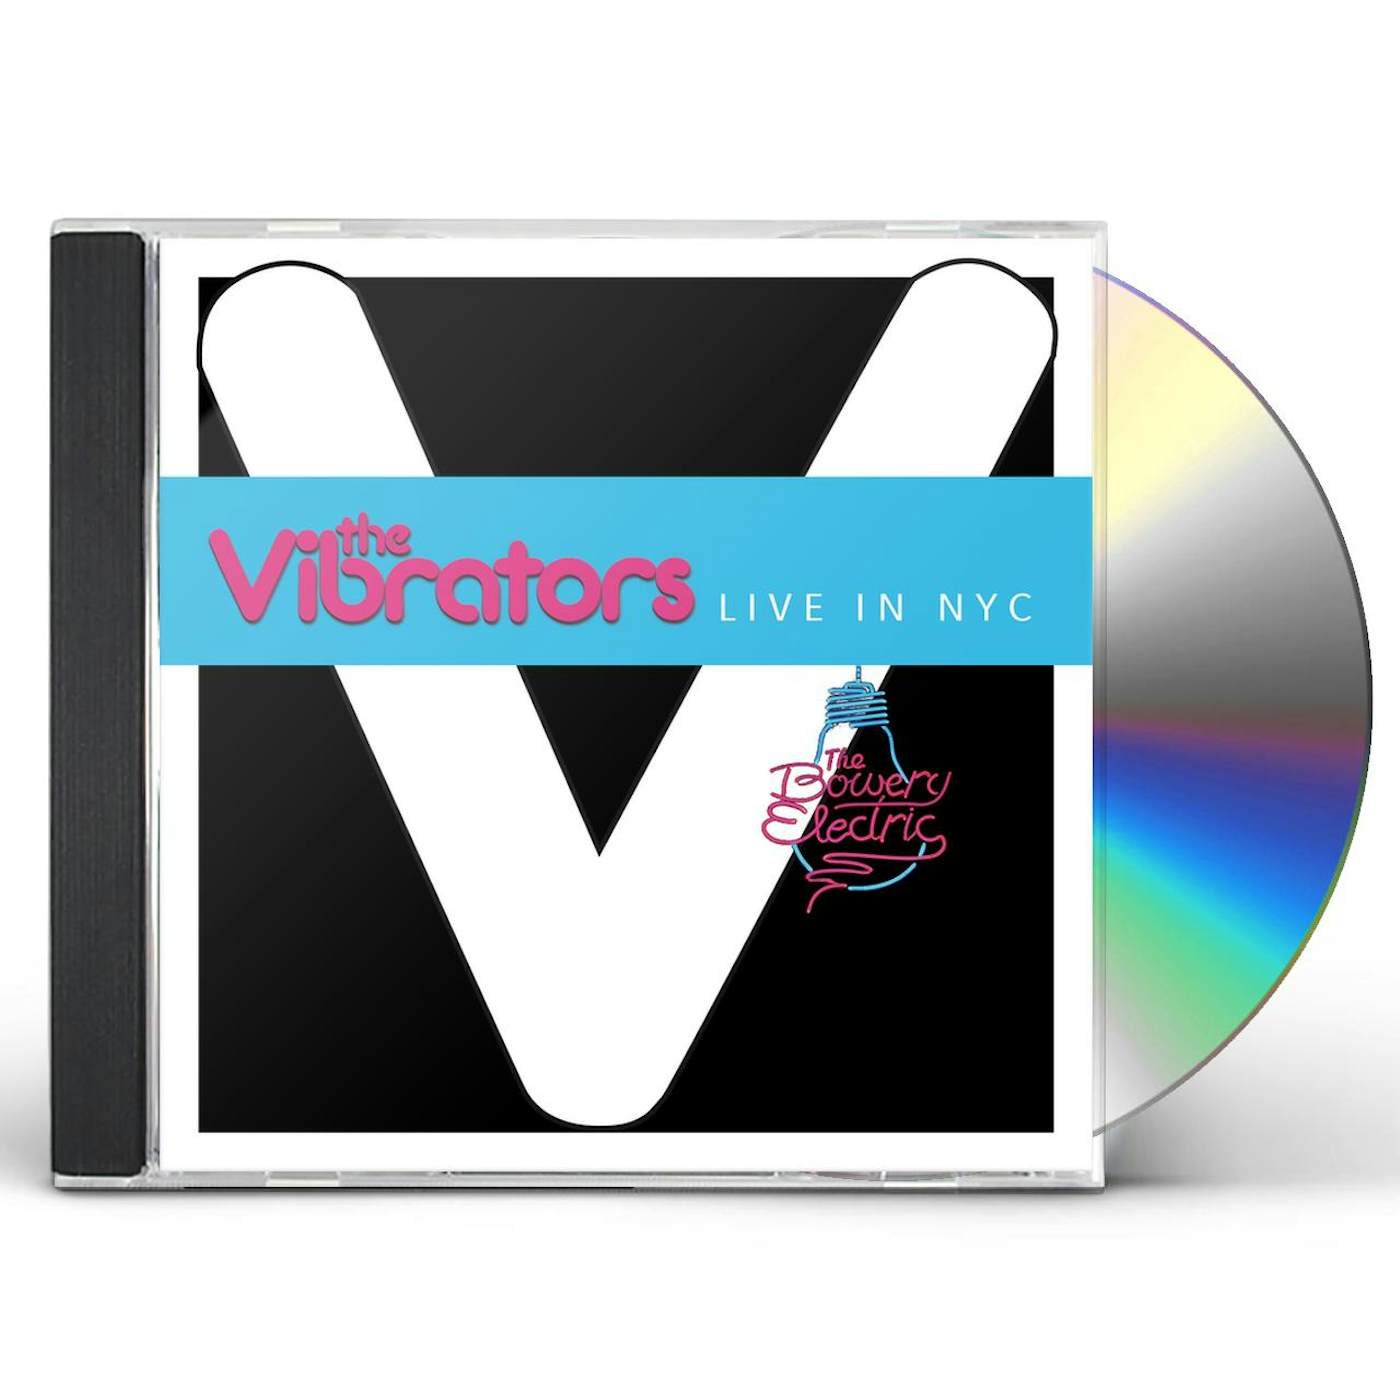 The Vibrators LIVE IN NYC (AT BOWERY ELECTRIC) CD